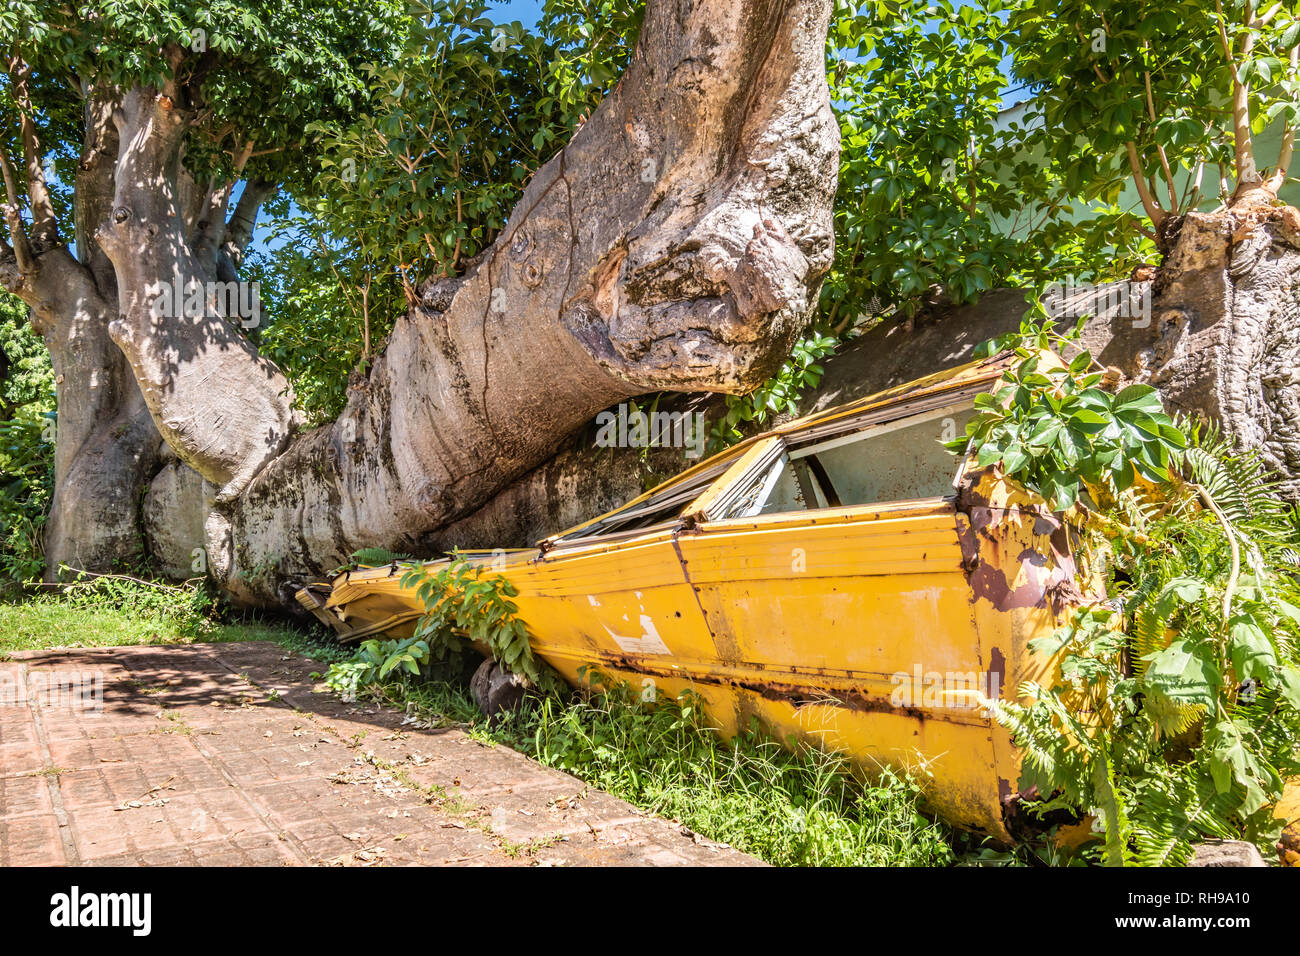 Yellow school bus crushed by tree on Dominica, Caribbean Stock Photo